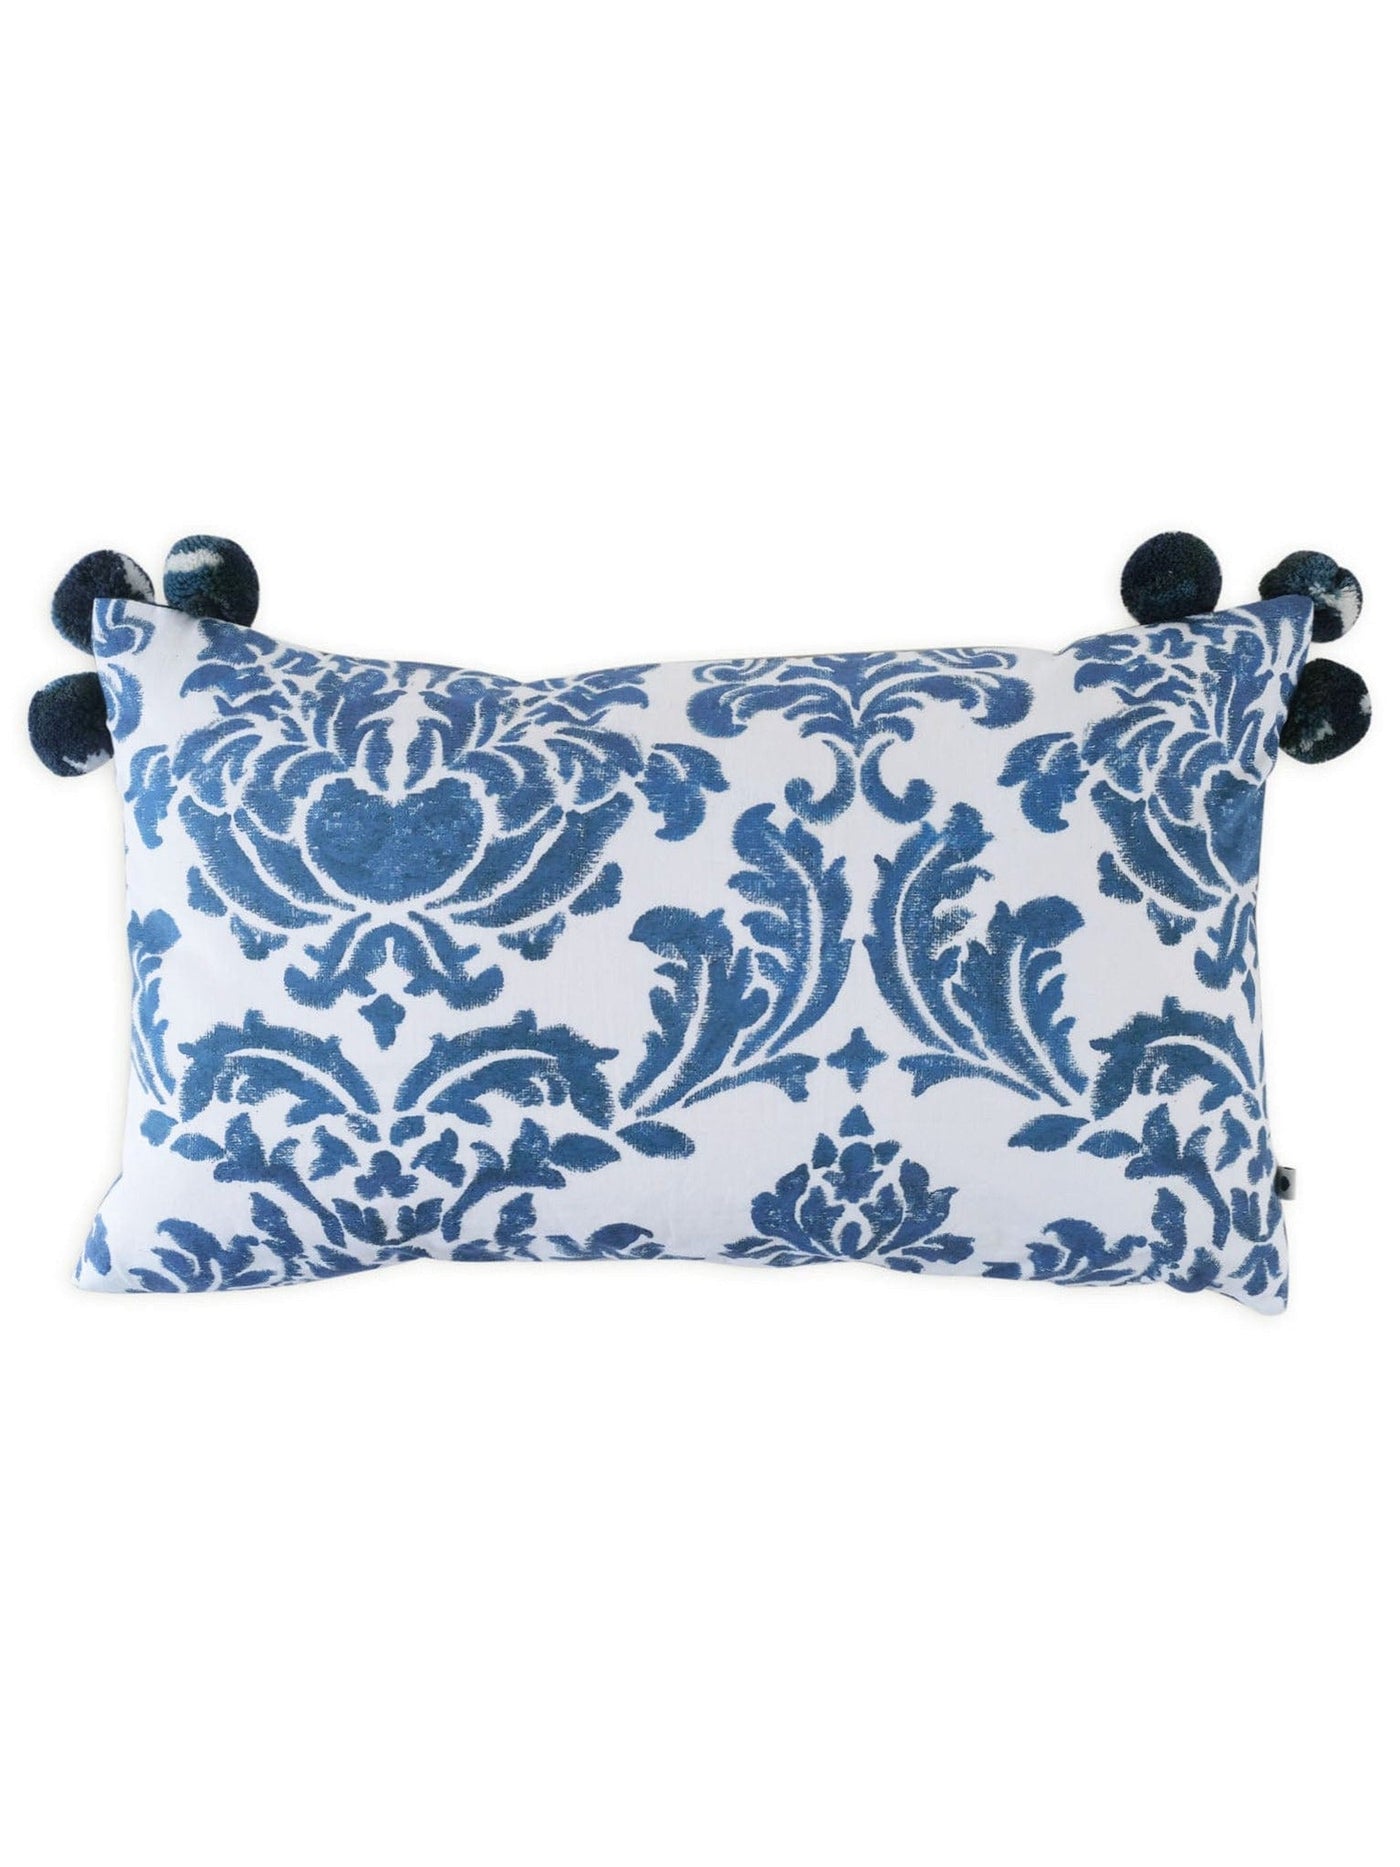 Cushion Cover - Damask Printed Space